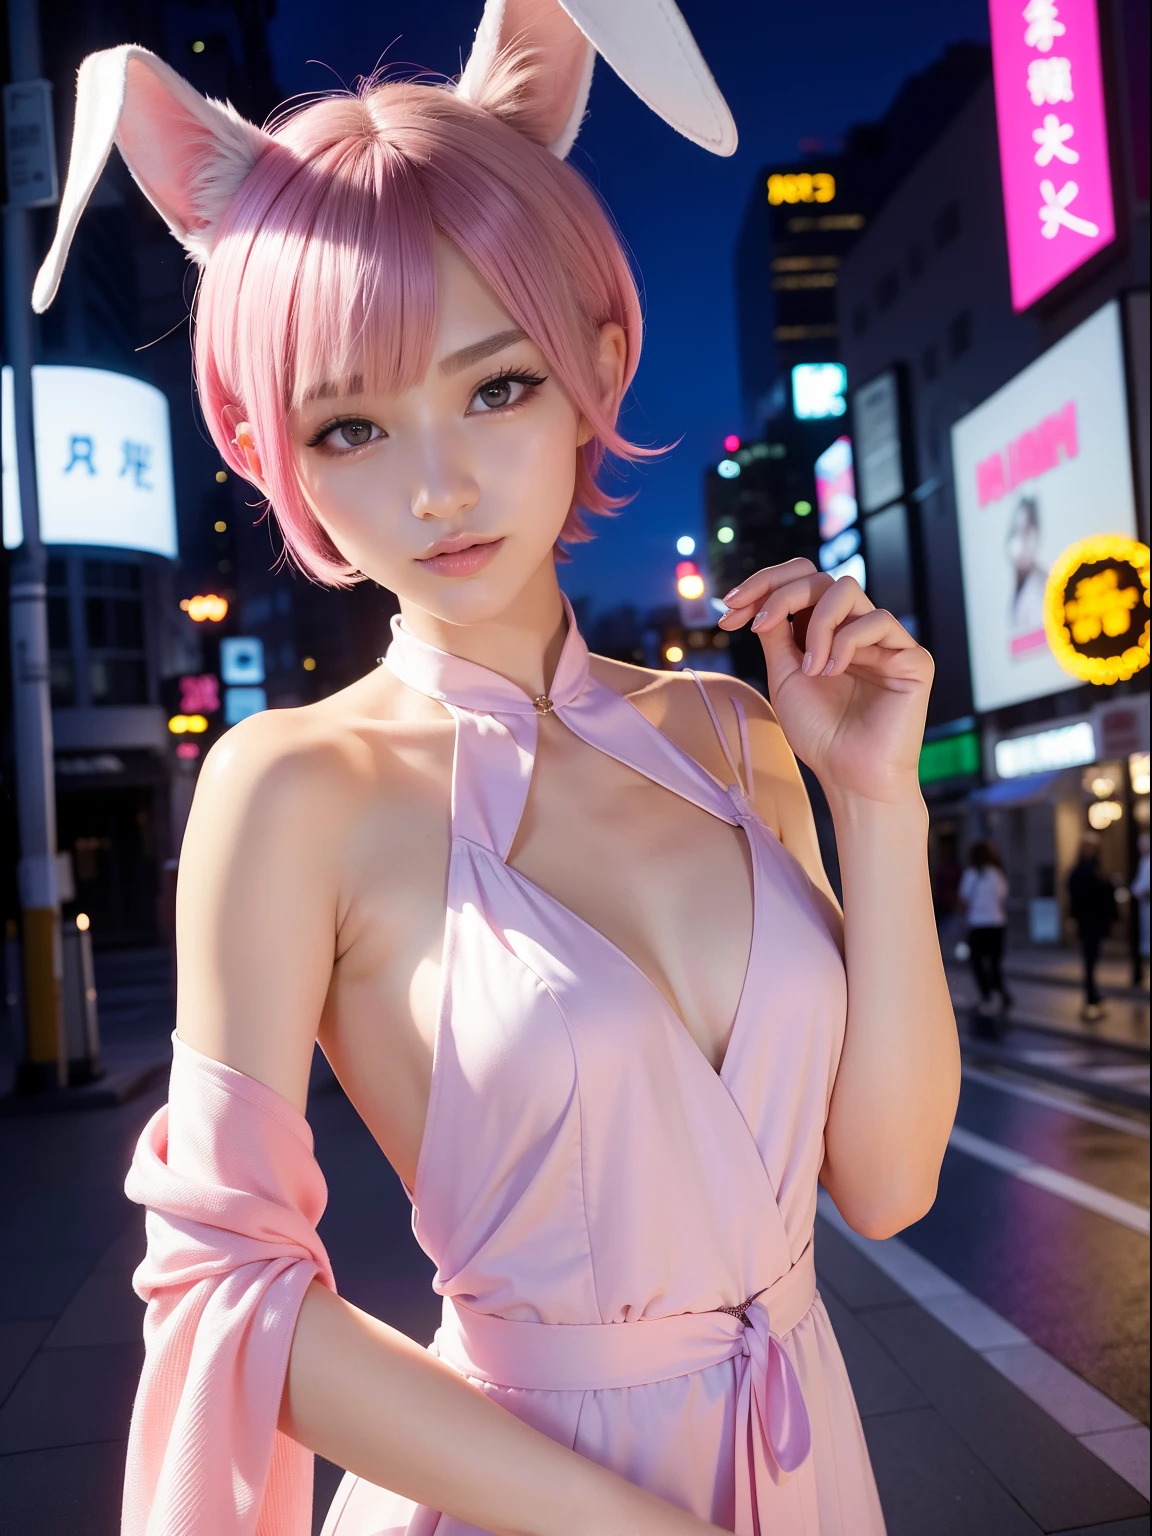 low angles、taken from the under、overall、On the street at night、mid night、Under the moonlight、The tattoo、fullnude、Pink short cut hair、fullnude(8K, top-quality, ​masterpiece:1.2), (realisitic, Photorealsitic:1.37)、cute little、solo、(A smile:1.15)、(Mouth closed)、tiny chest、（short-hair：1.2）、masuter piece、Pink Shortcut Bob、Realistic rabbit ears、Pink realistic rabbit ears、Realistic ears of rabbits sticking out of the head、Pink hair、Beautiful girl in her 20s、Bewitching atmosphere、Beautiful shaped hands、K-POP、Pink rabbit ears、1 girl in、solo、​masterpiece、top-quality、realisitic、Hyper-detailing、absurderes、short pink hair、Slender beauties、Dynamic Lighting、hight resolution、sharp focus、depth of fields、(thick thight:1.0)、A slender :1.2，((Short-cut bob hair))、((k pop:1.3))，Highly detailed facial and skin texture、((Enchanting))，Anatomically correct number of fingers，Correct anatomy